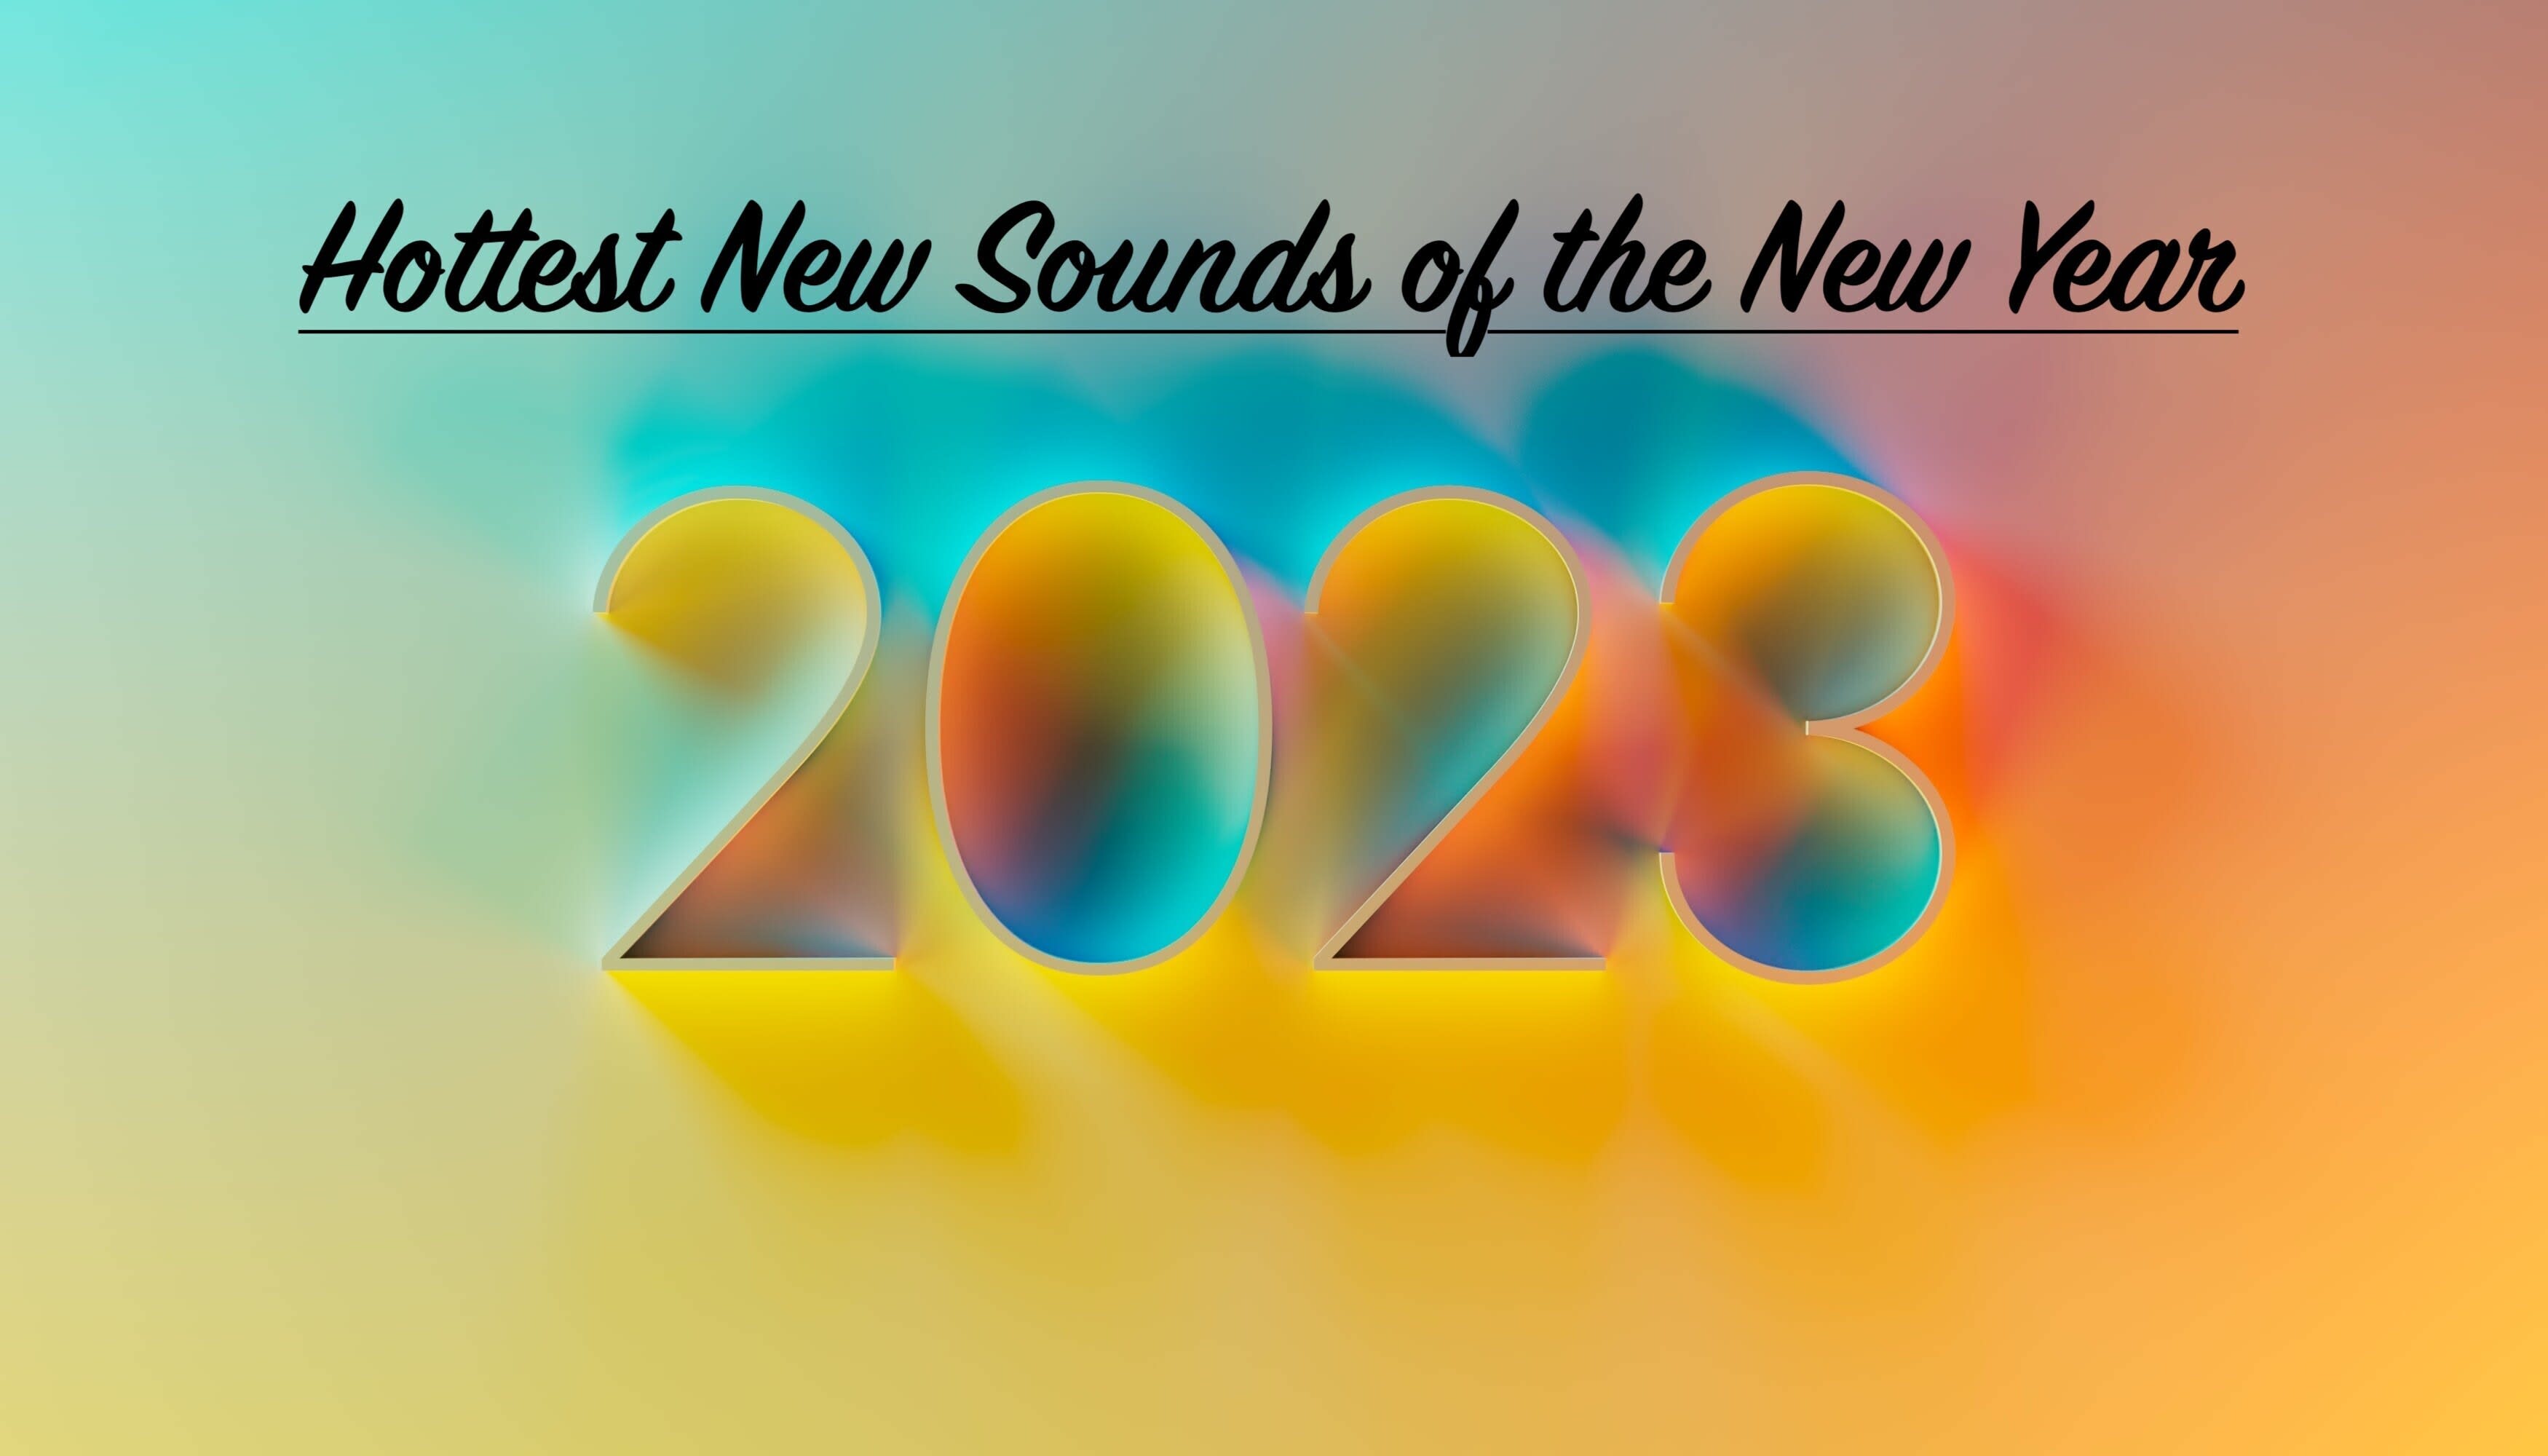 11 One/Music&#8217;s 2023 current sounds